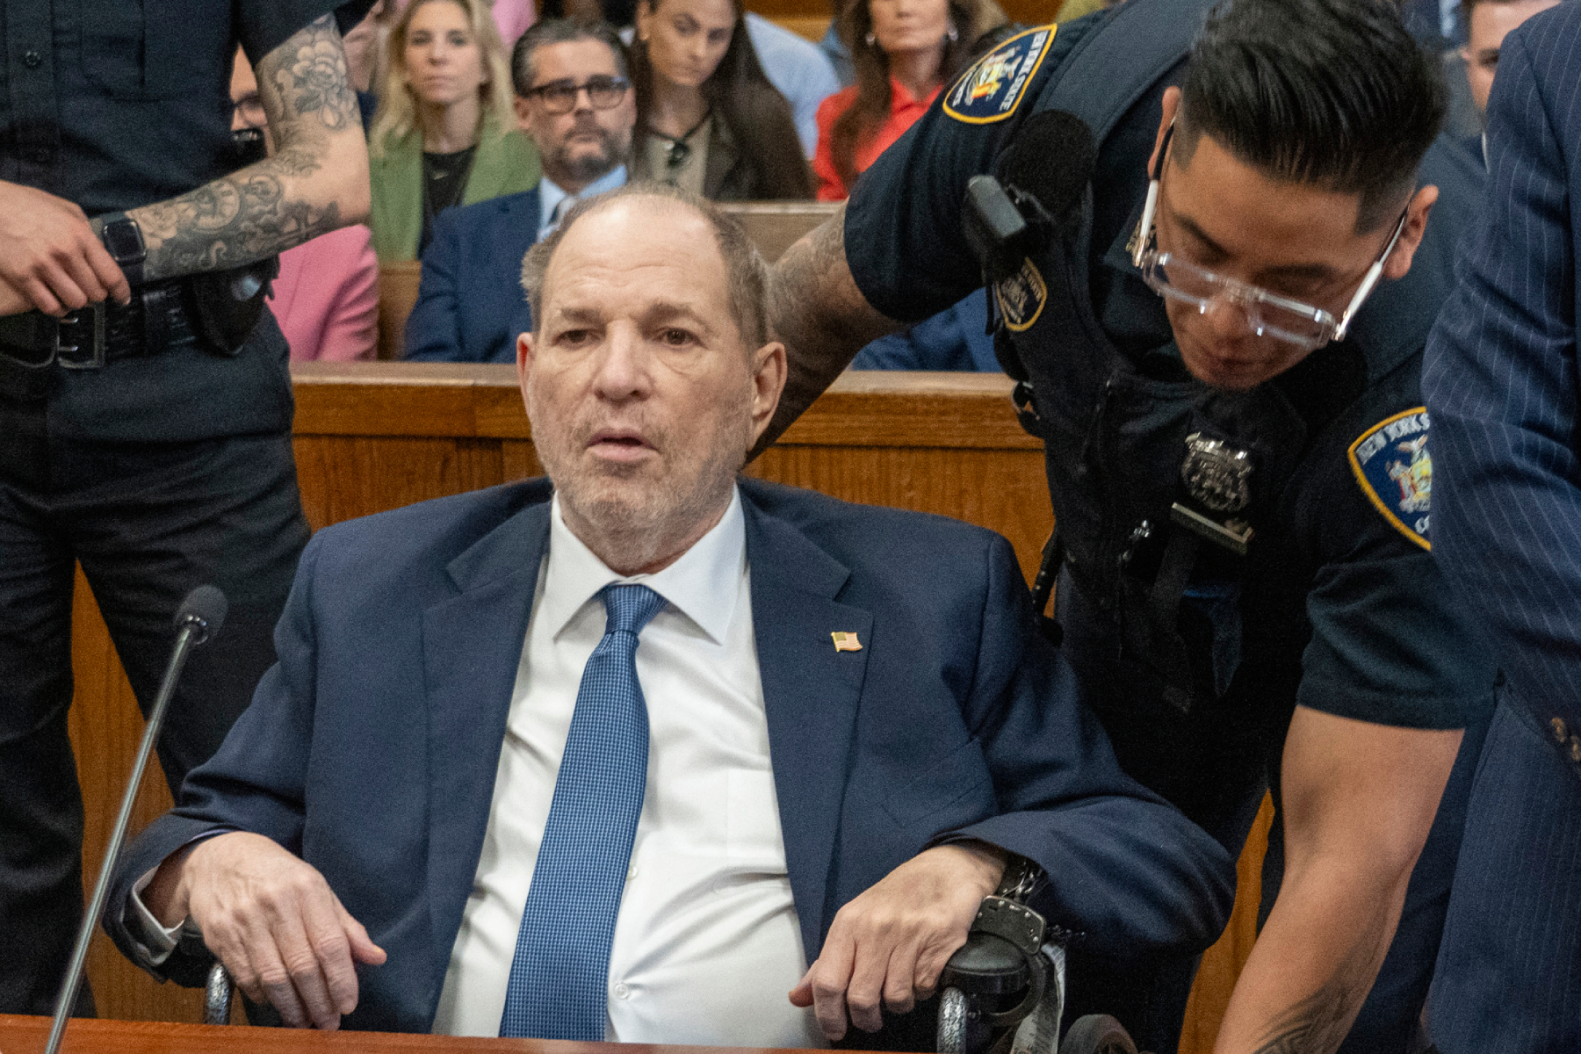 Weinstein faces retrial following overturning of 2020 rape conviction (Credits: Getty Images)